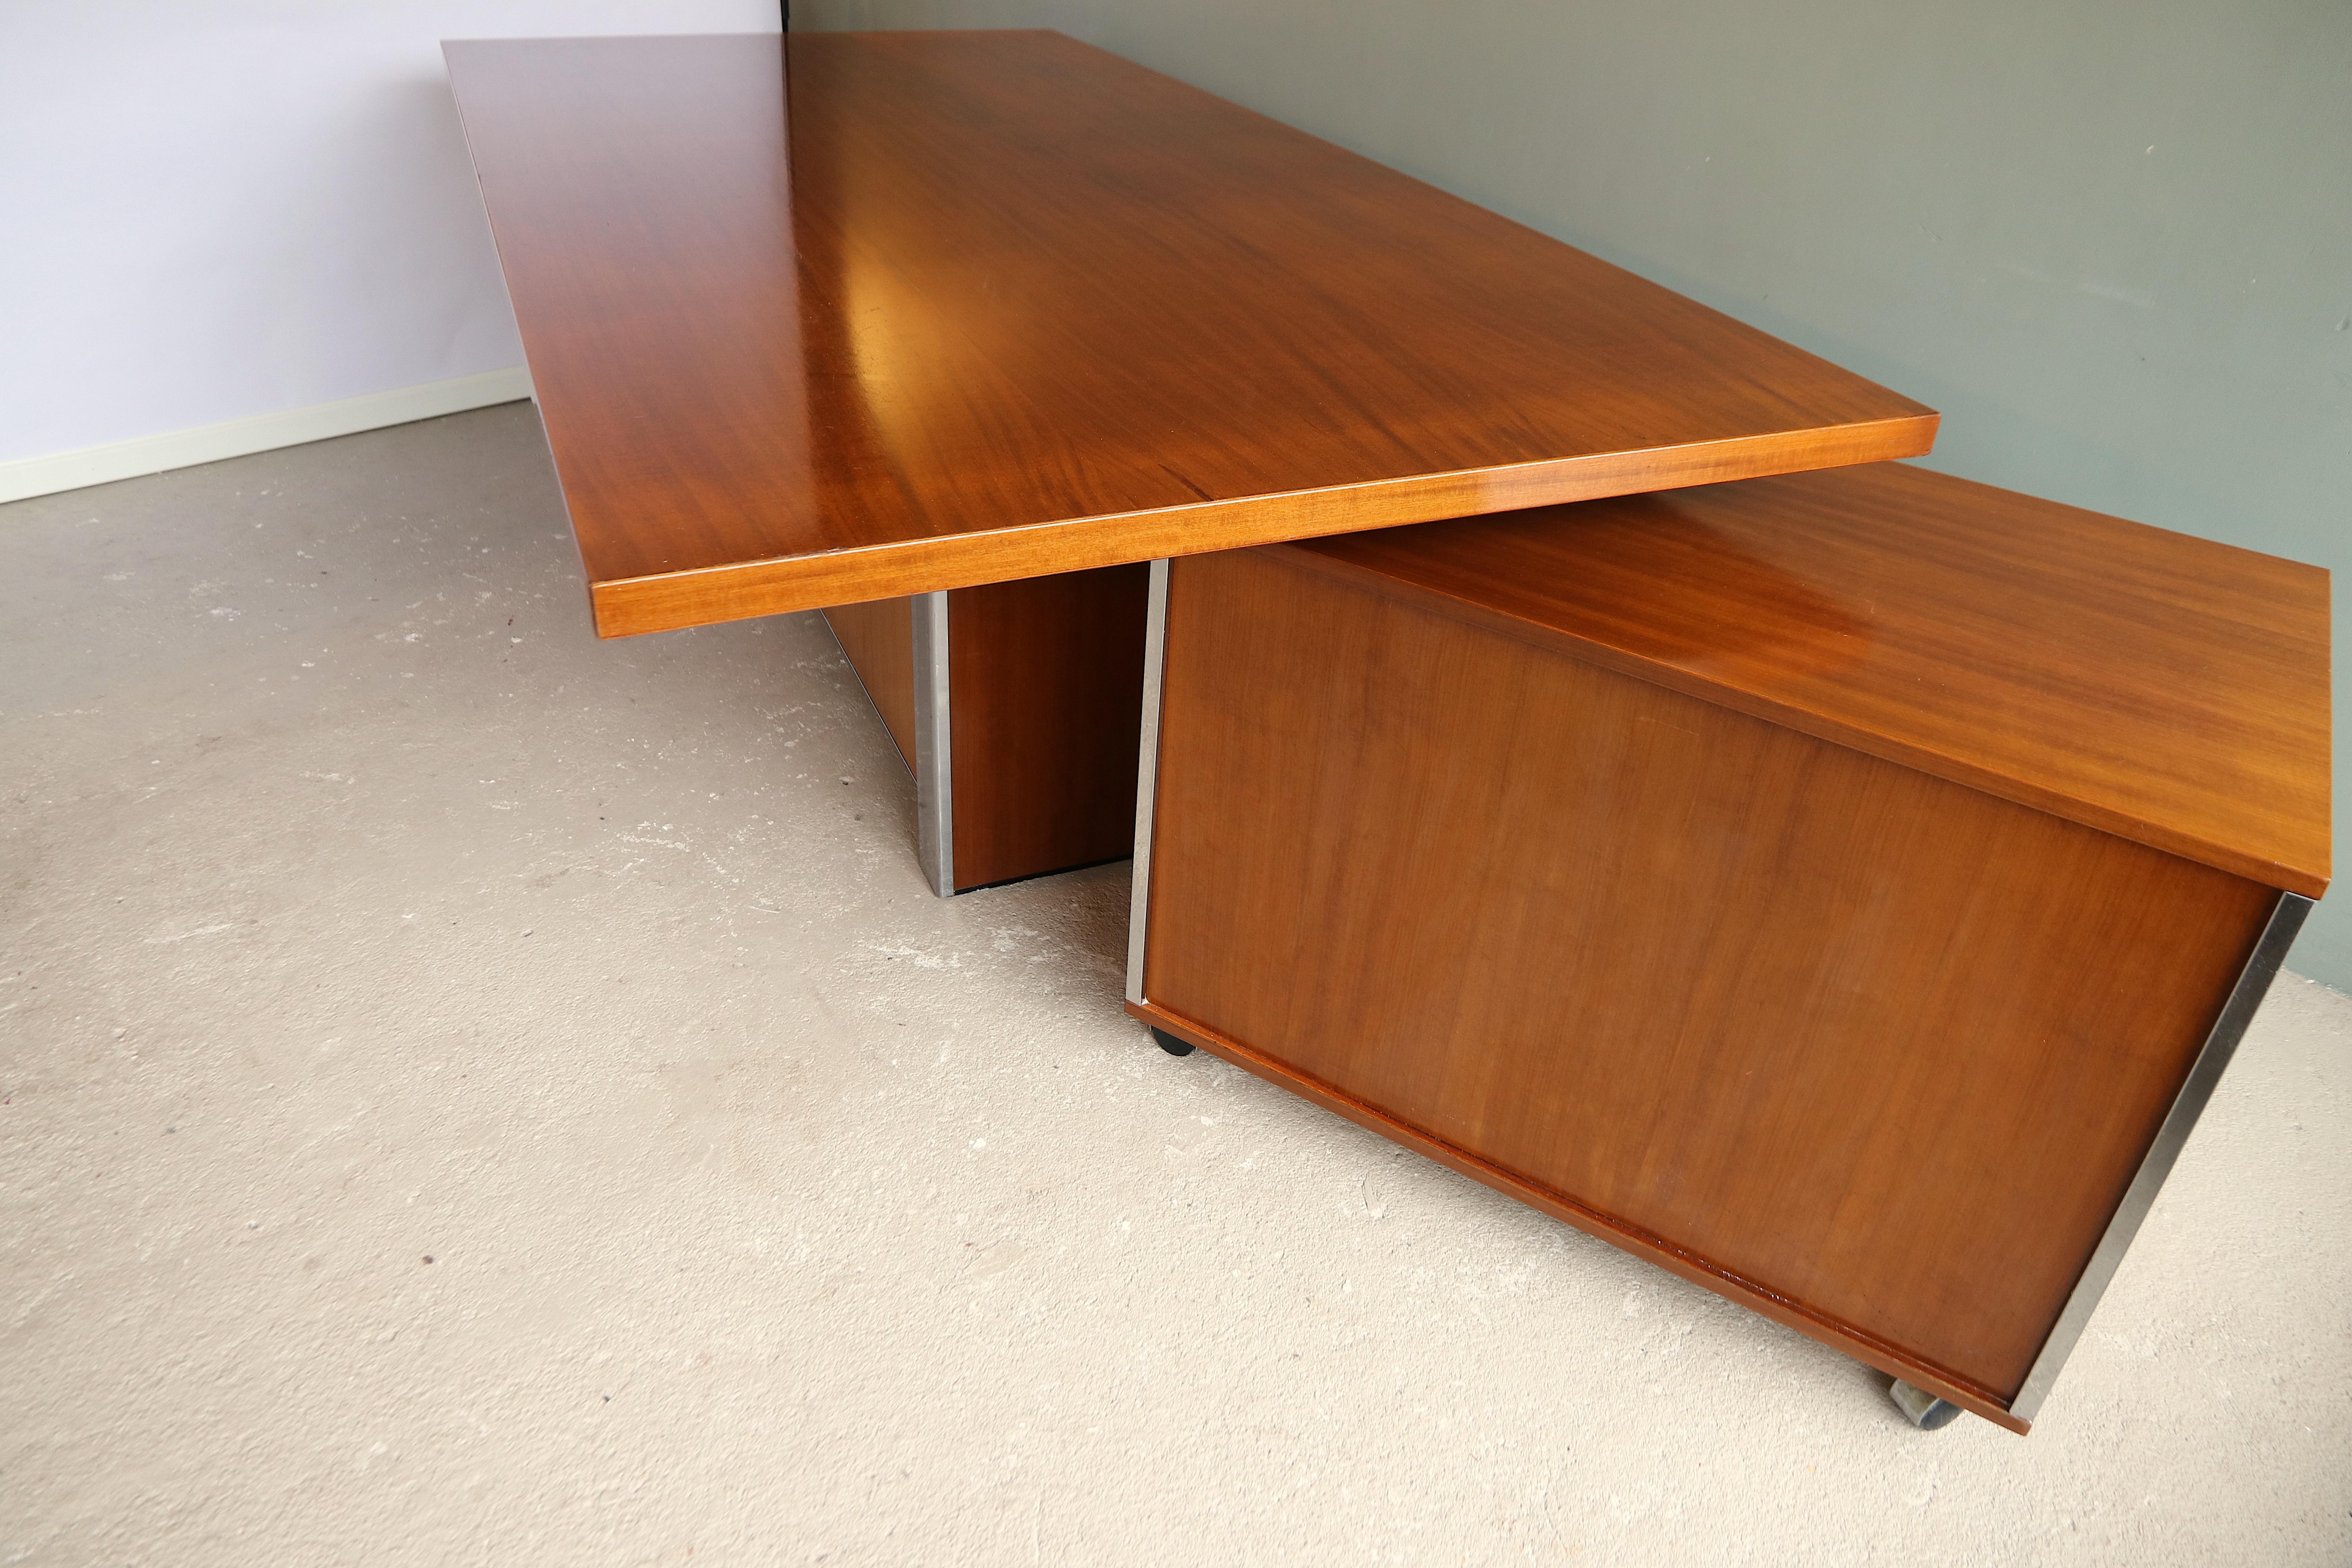 Mid-20th Century Free-Standing Executive Corner Desk Ico Parisi Style for MIM Roma, Italy, 1960s For Sale